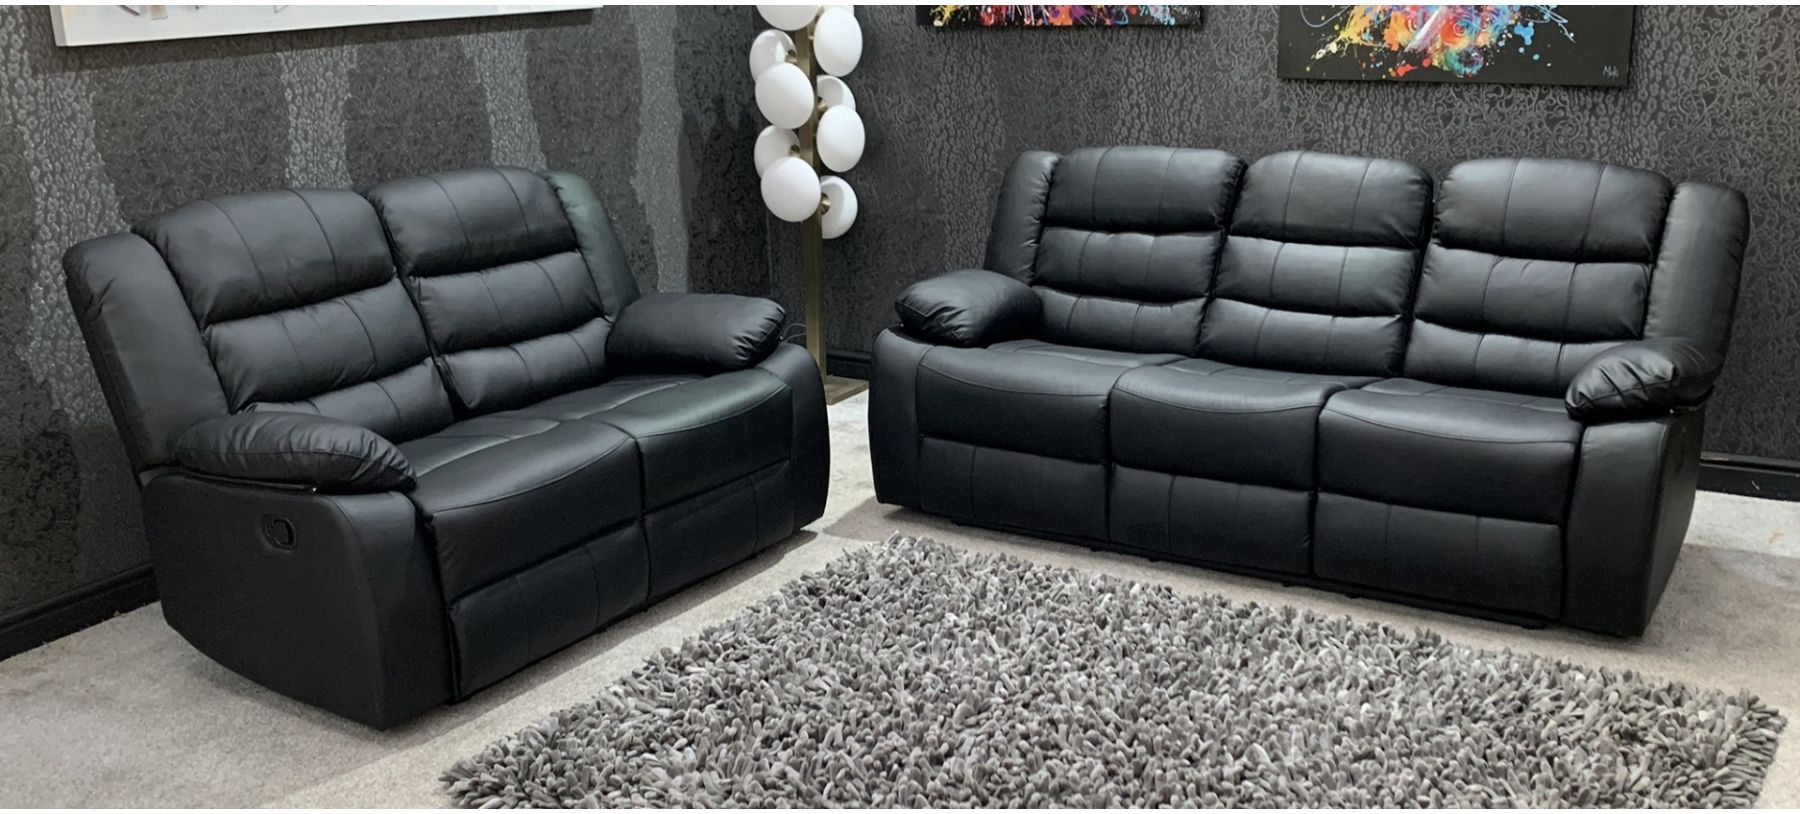 Roman Black Recliners Leather Sofa Set, Roma Leather Recliner Sofa Reviews